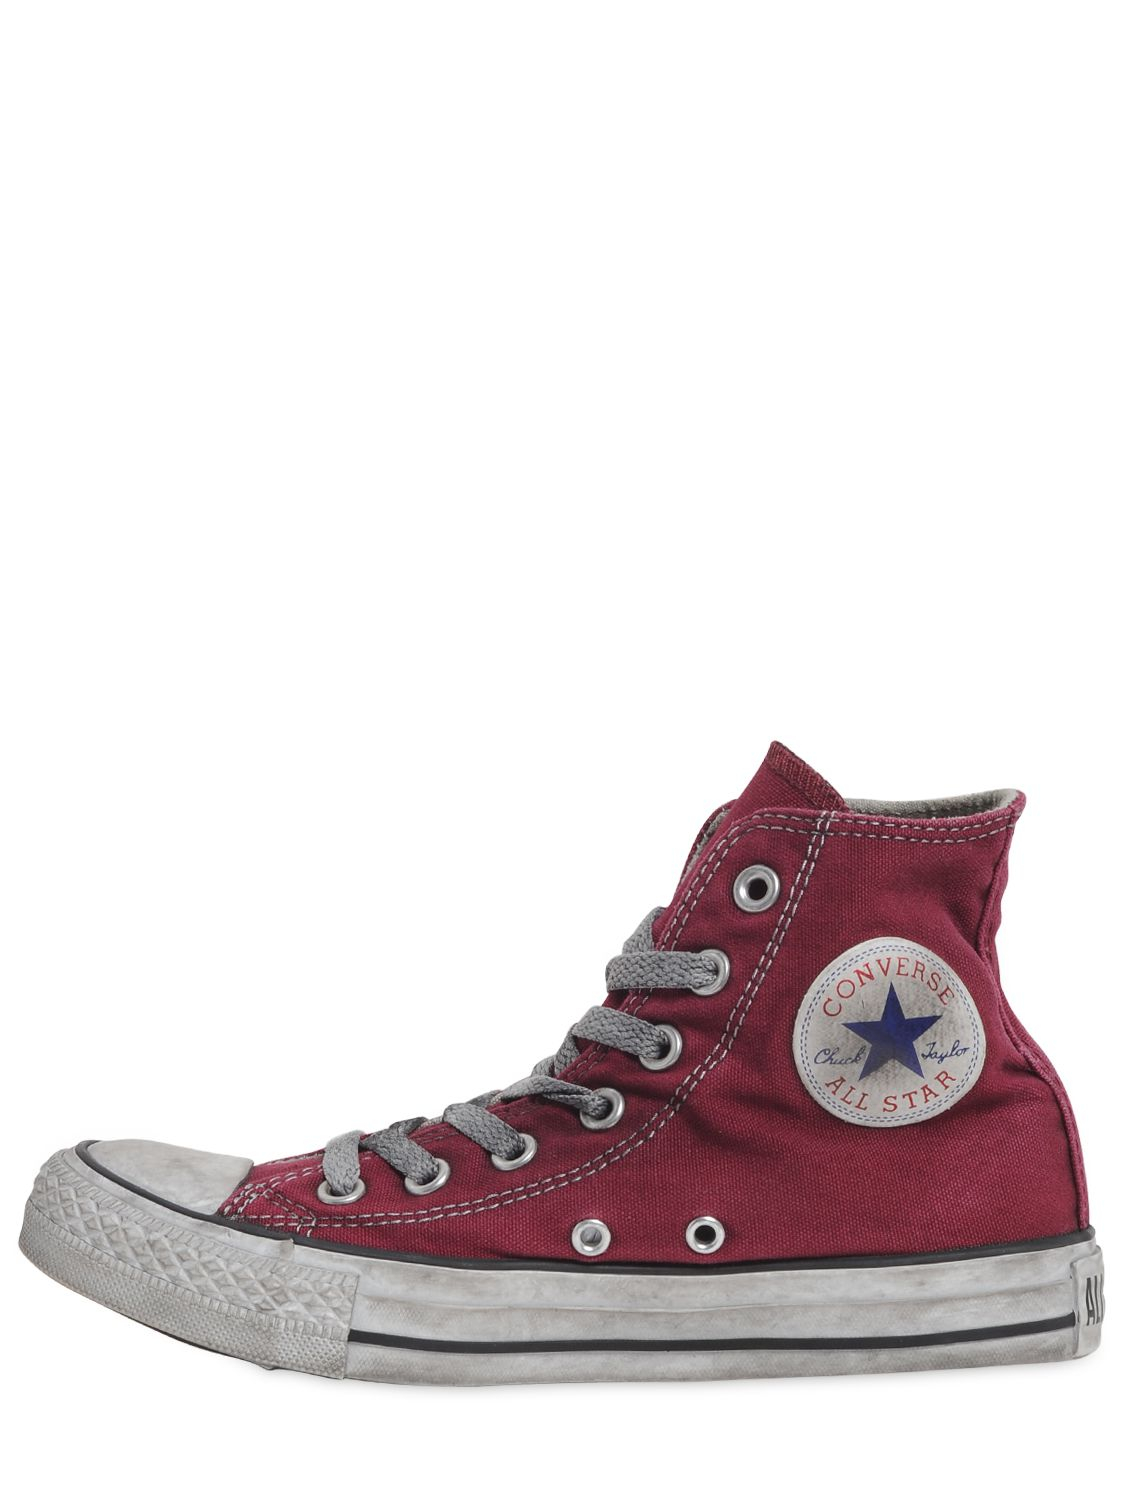 limited edition all stars